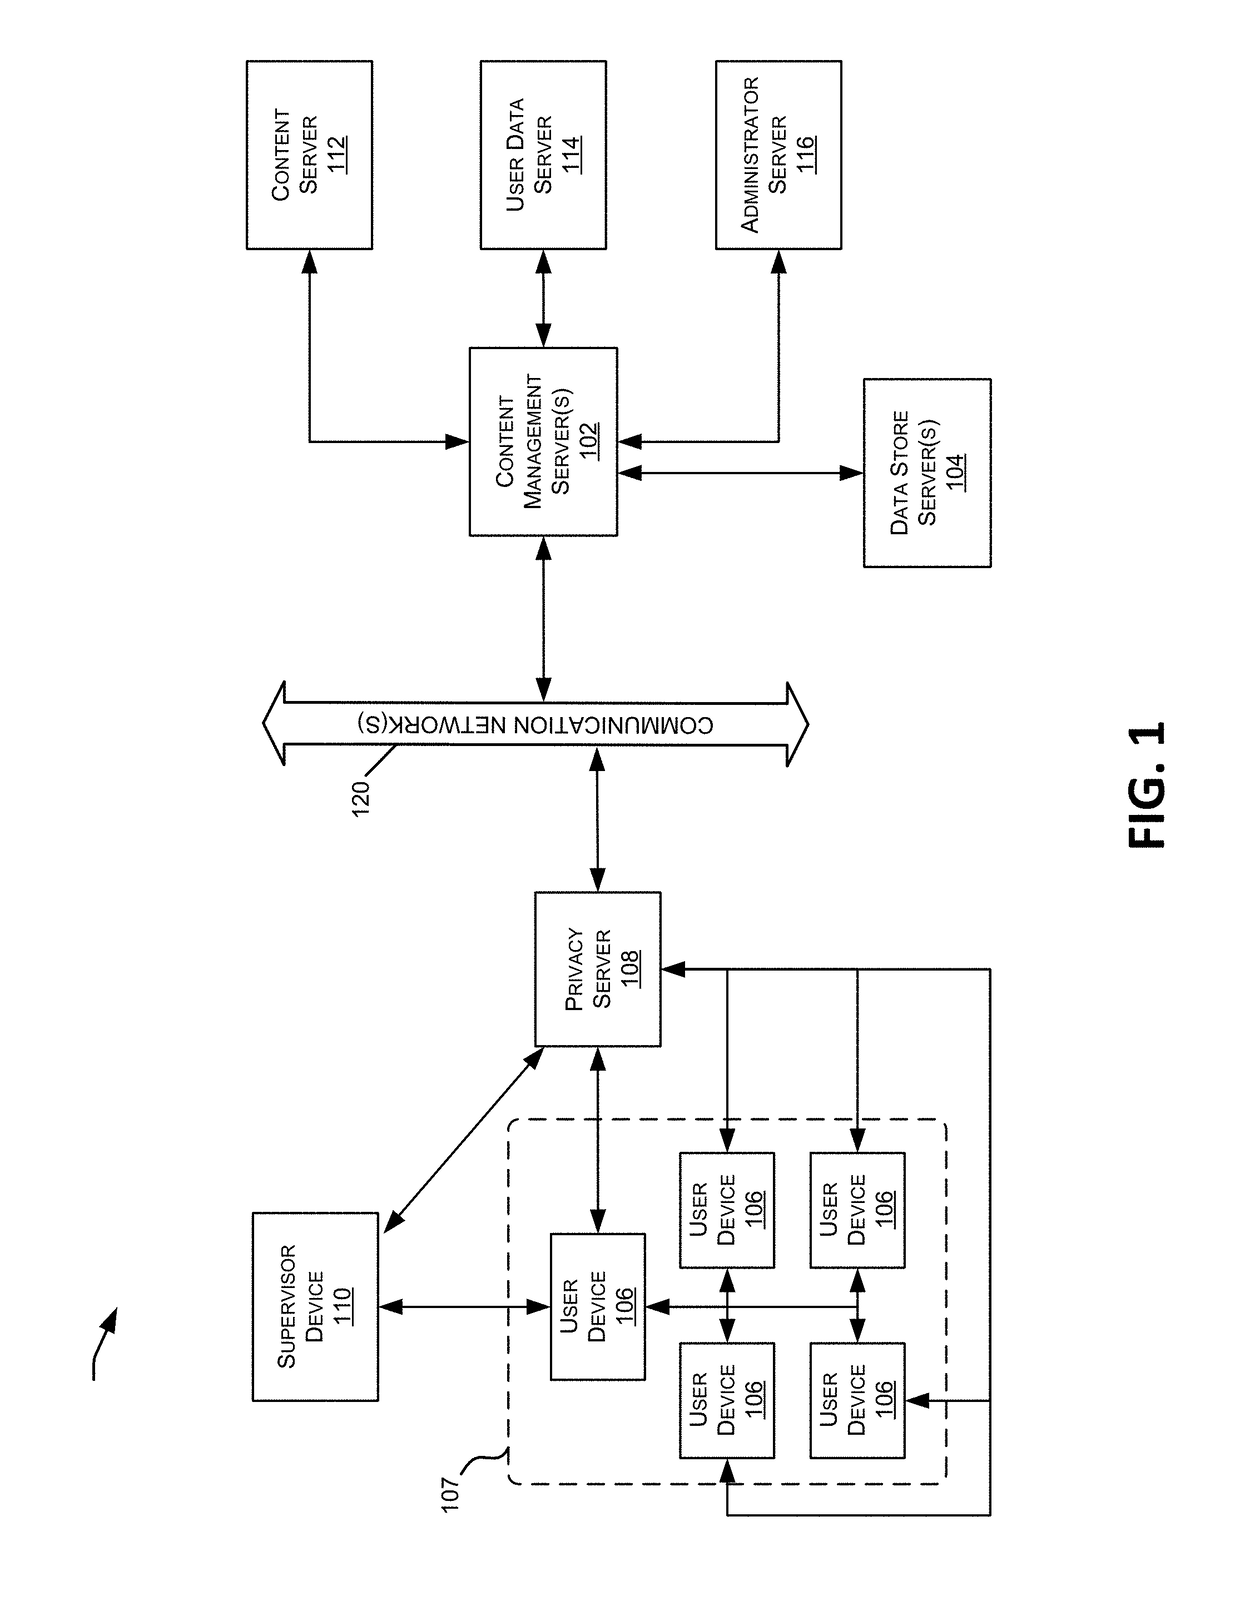 Monitoring physical simulations within a digital credential platform